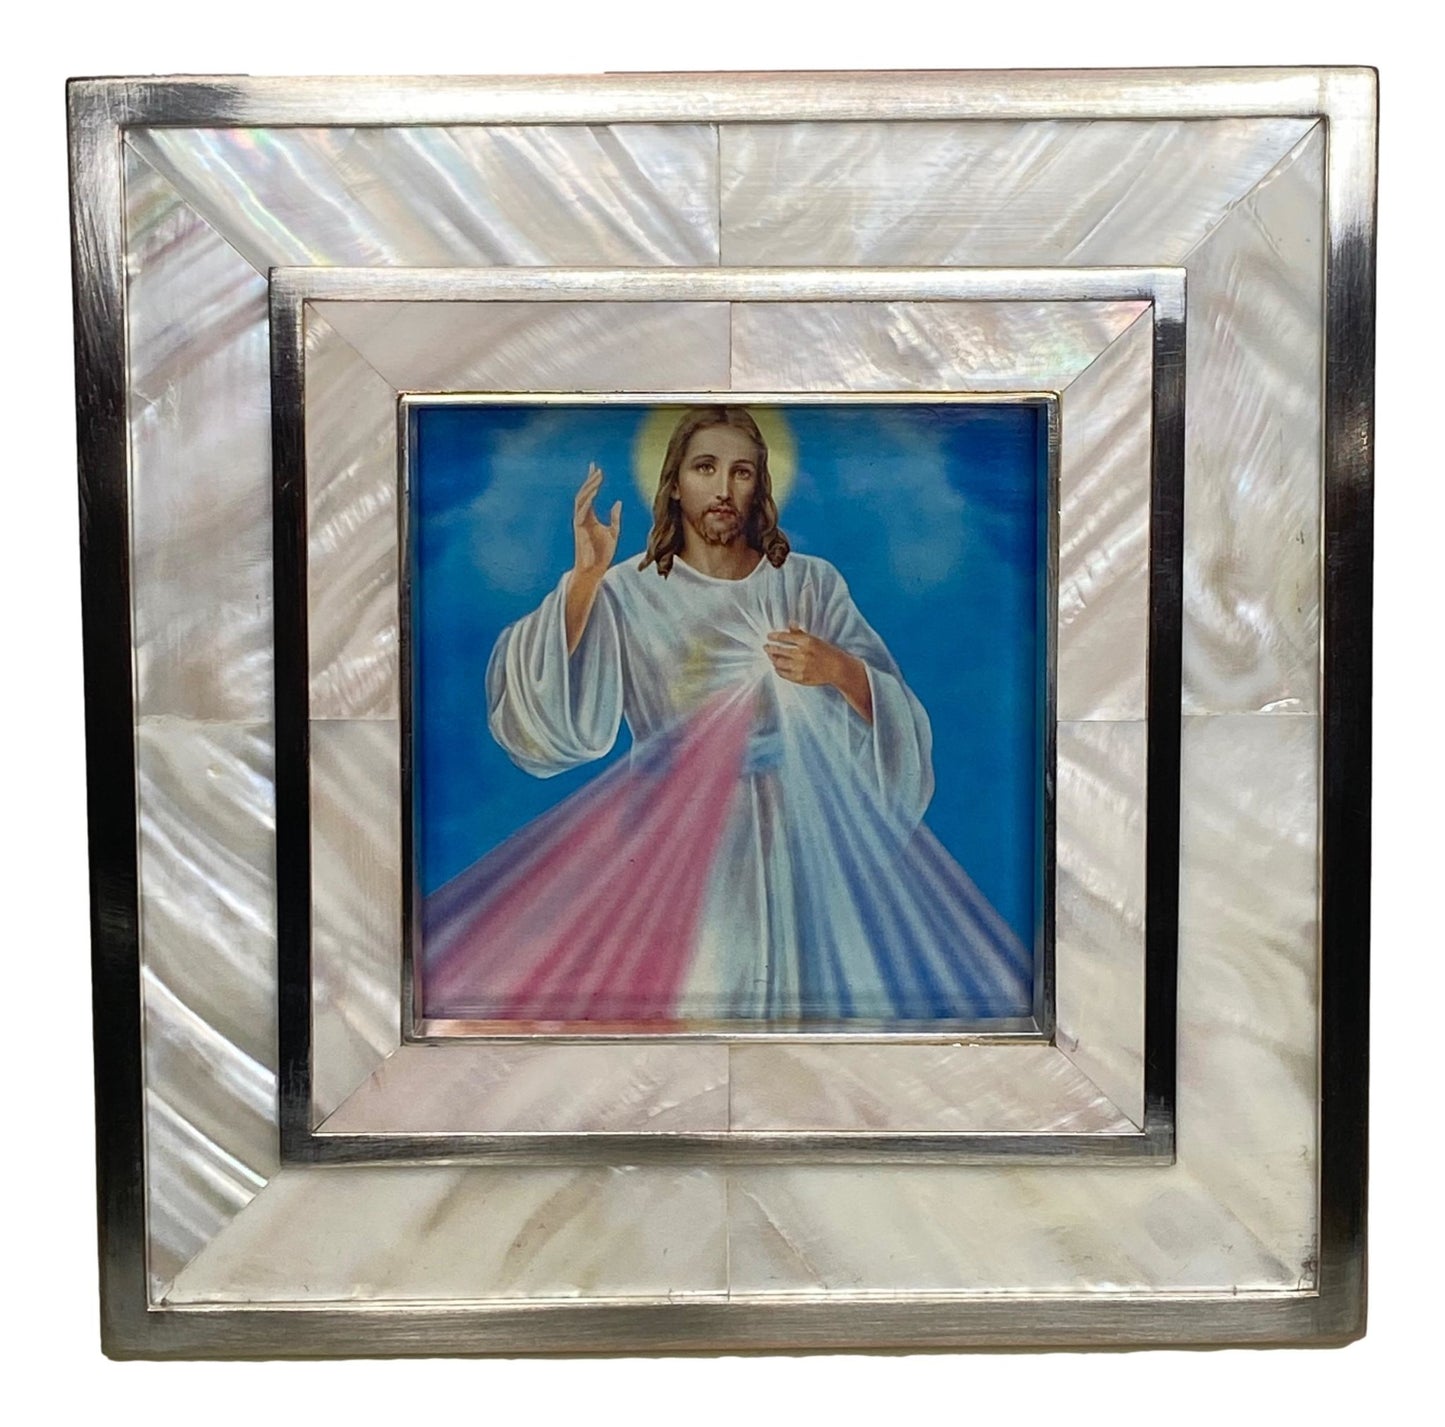 Frame Metal Mother of Pearl Divine Mercy Image 7 L x 7 W Inches - Ysleta Mission Gift Shop- VOTED 2022 El Paso's Best Gift Shop